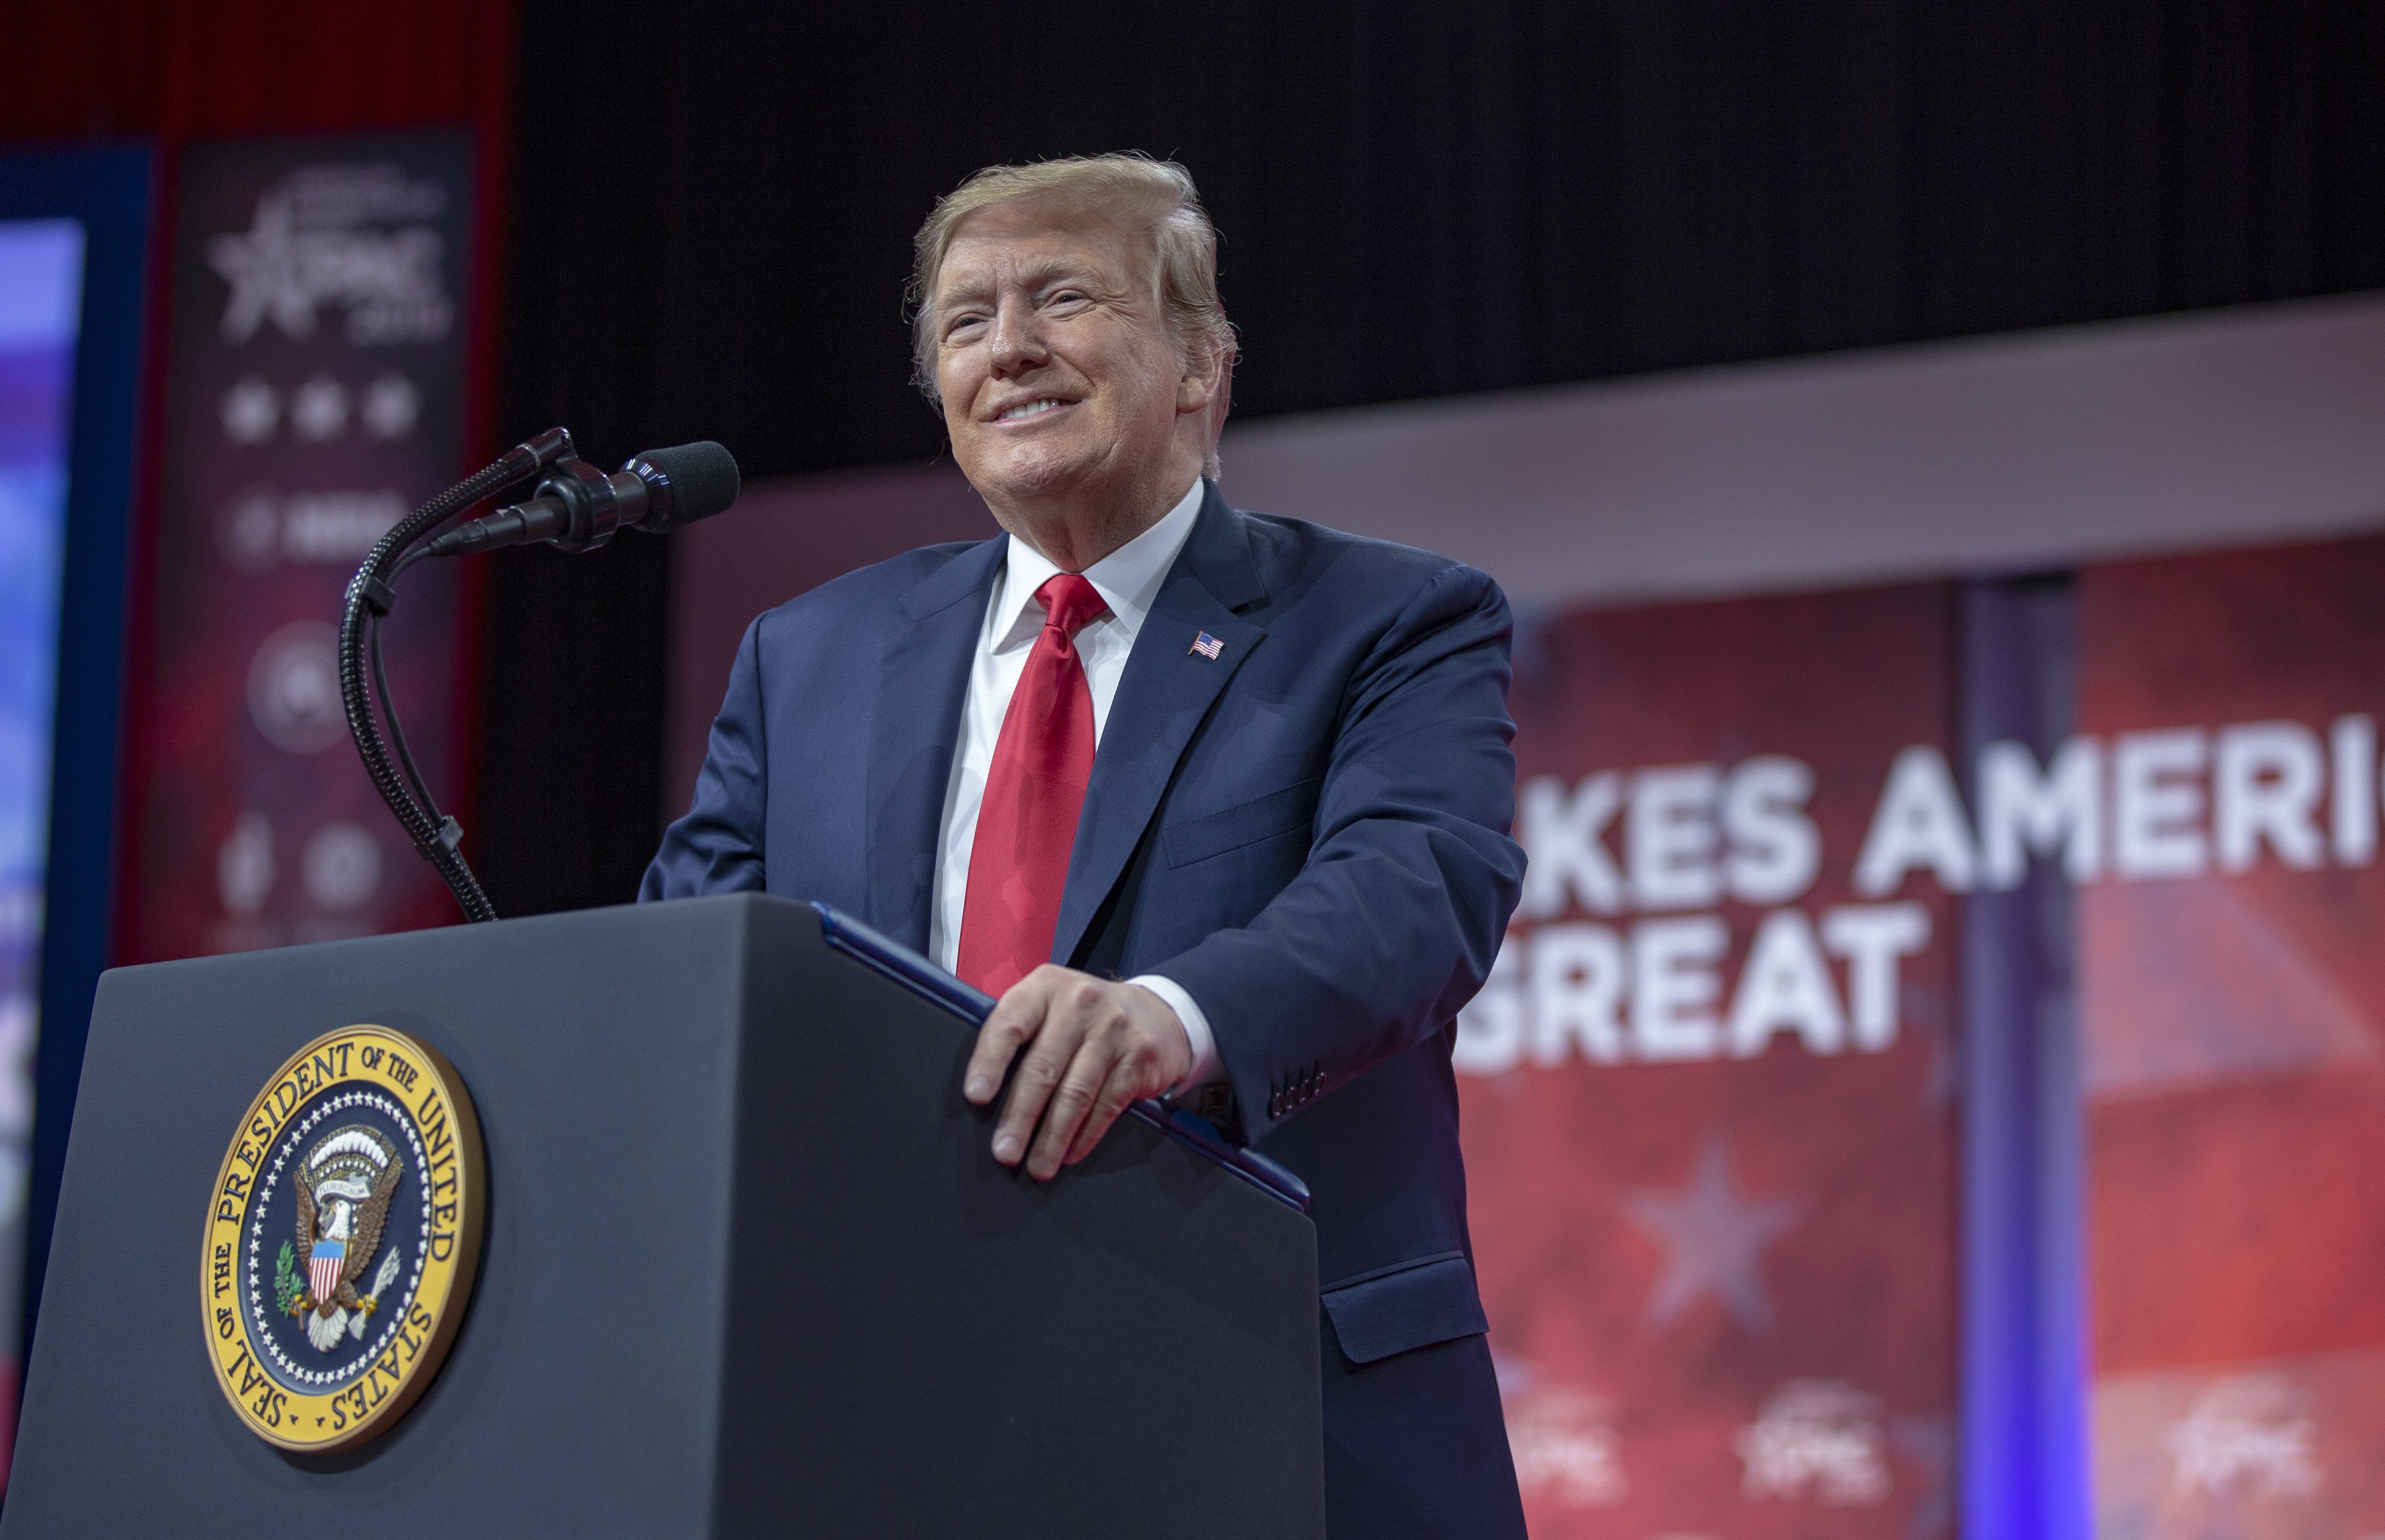 Donald Trump delivering a speech at the 2019 CPAC in Maryland | Photo: Getty Images